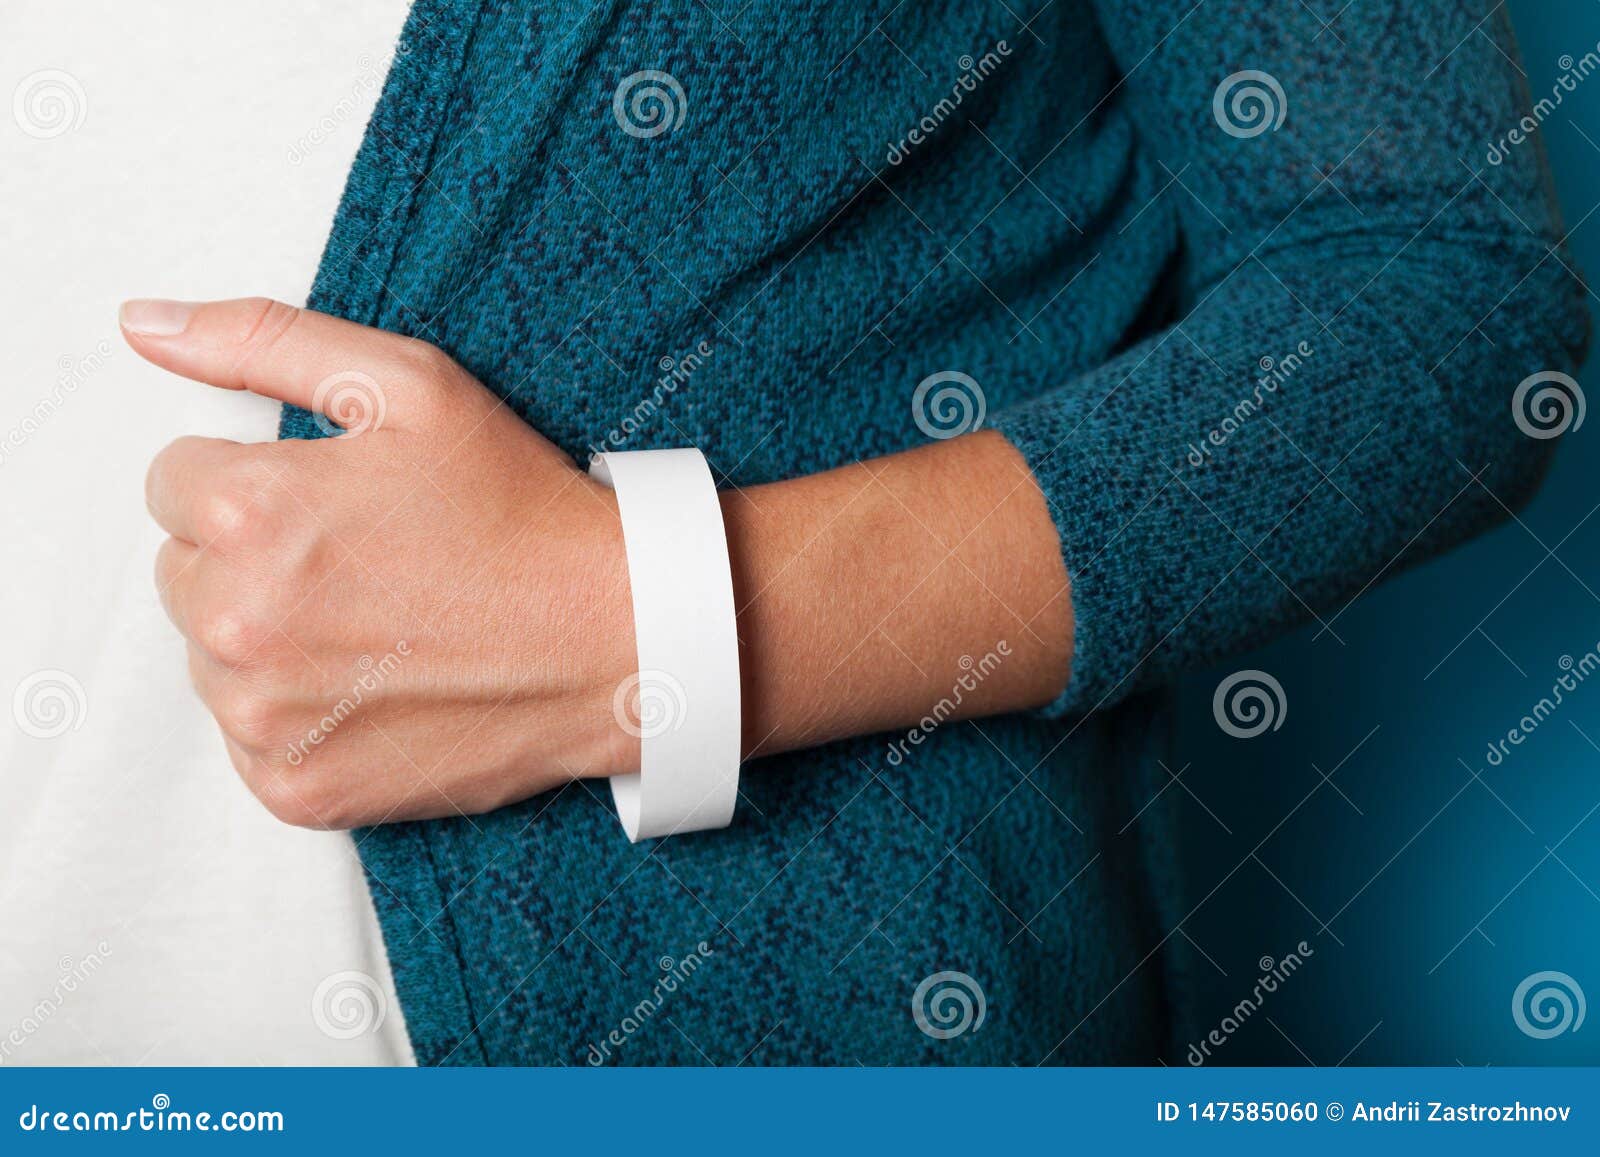 Download Event Bracelet Blank, White Paper Concert Ticket Mockup. Wristband Activity Accessory Stock ...